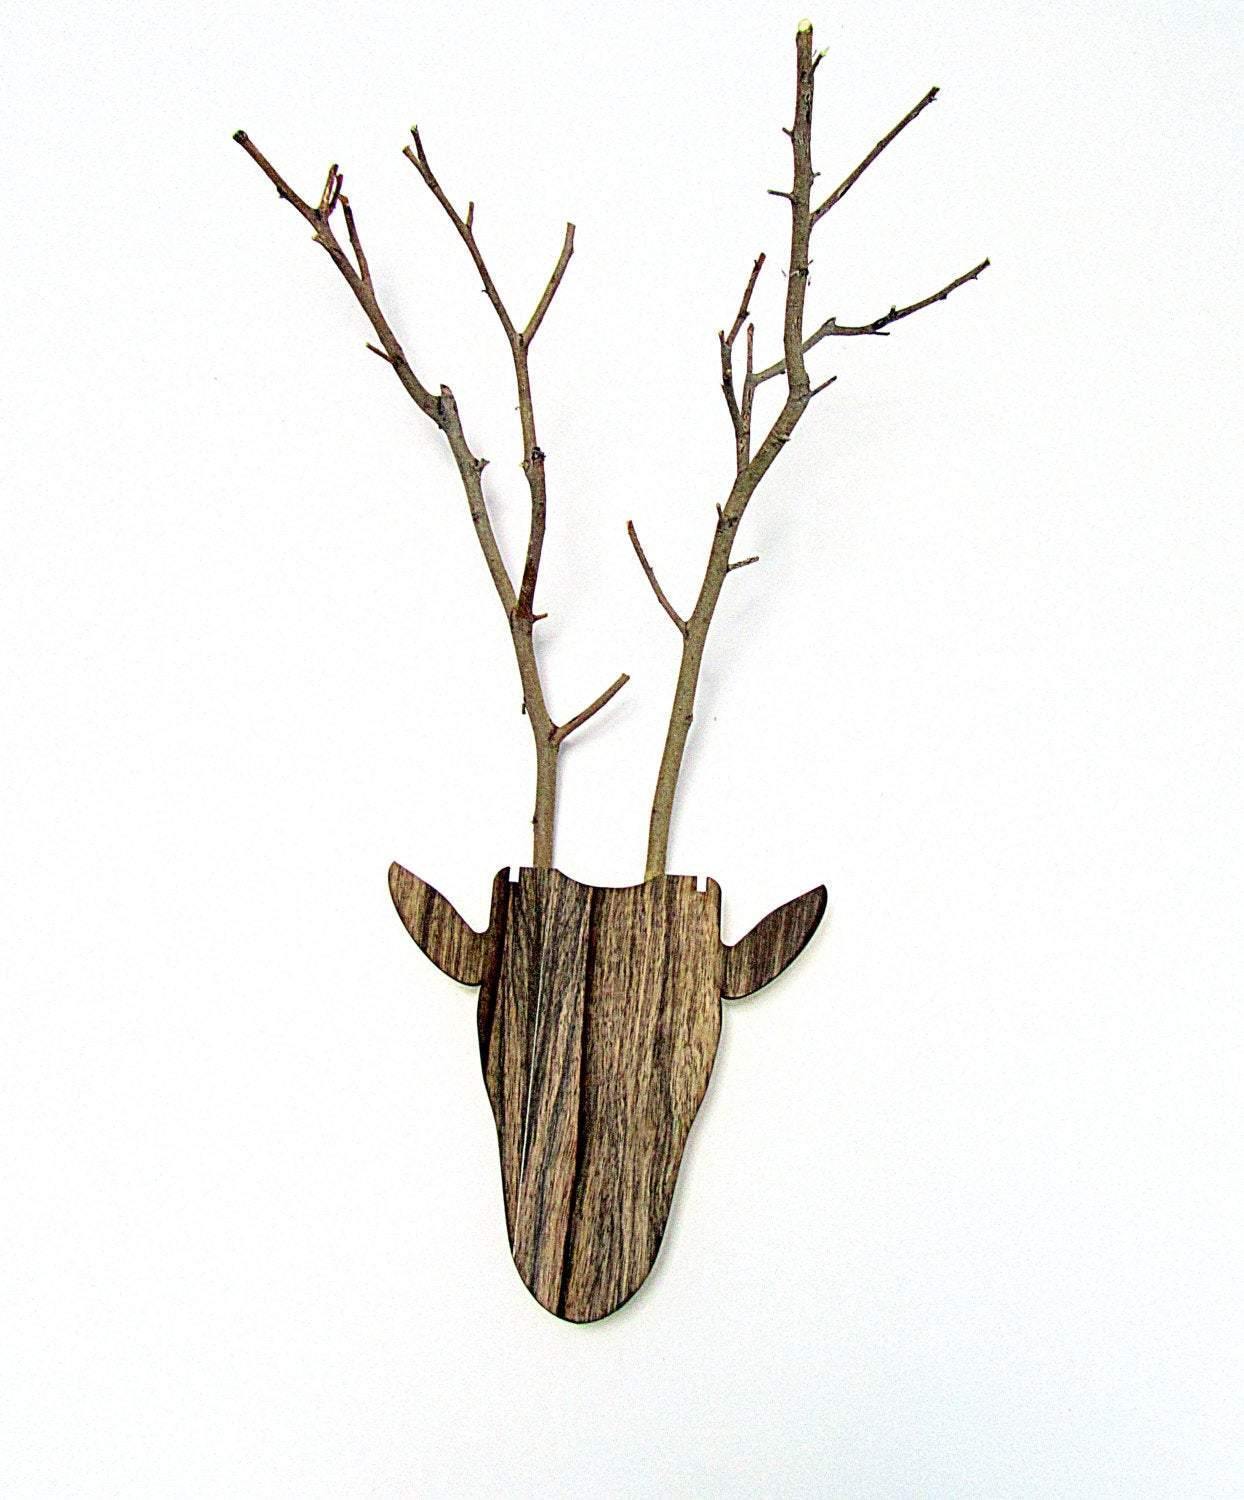 Unique jewelry hanger - Deer head with antlers made from branches - GLEZANT designer goods store. 